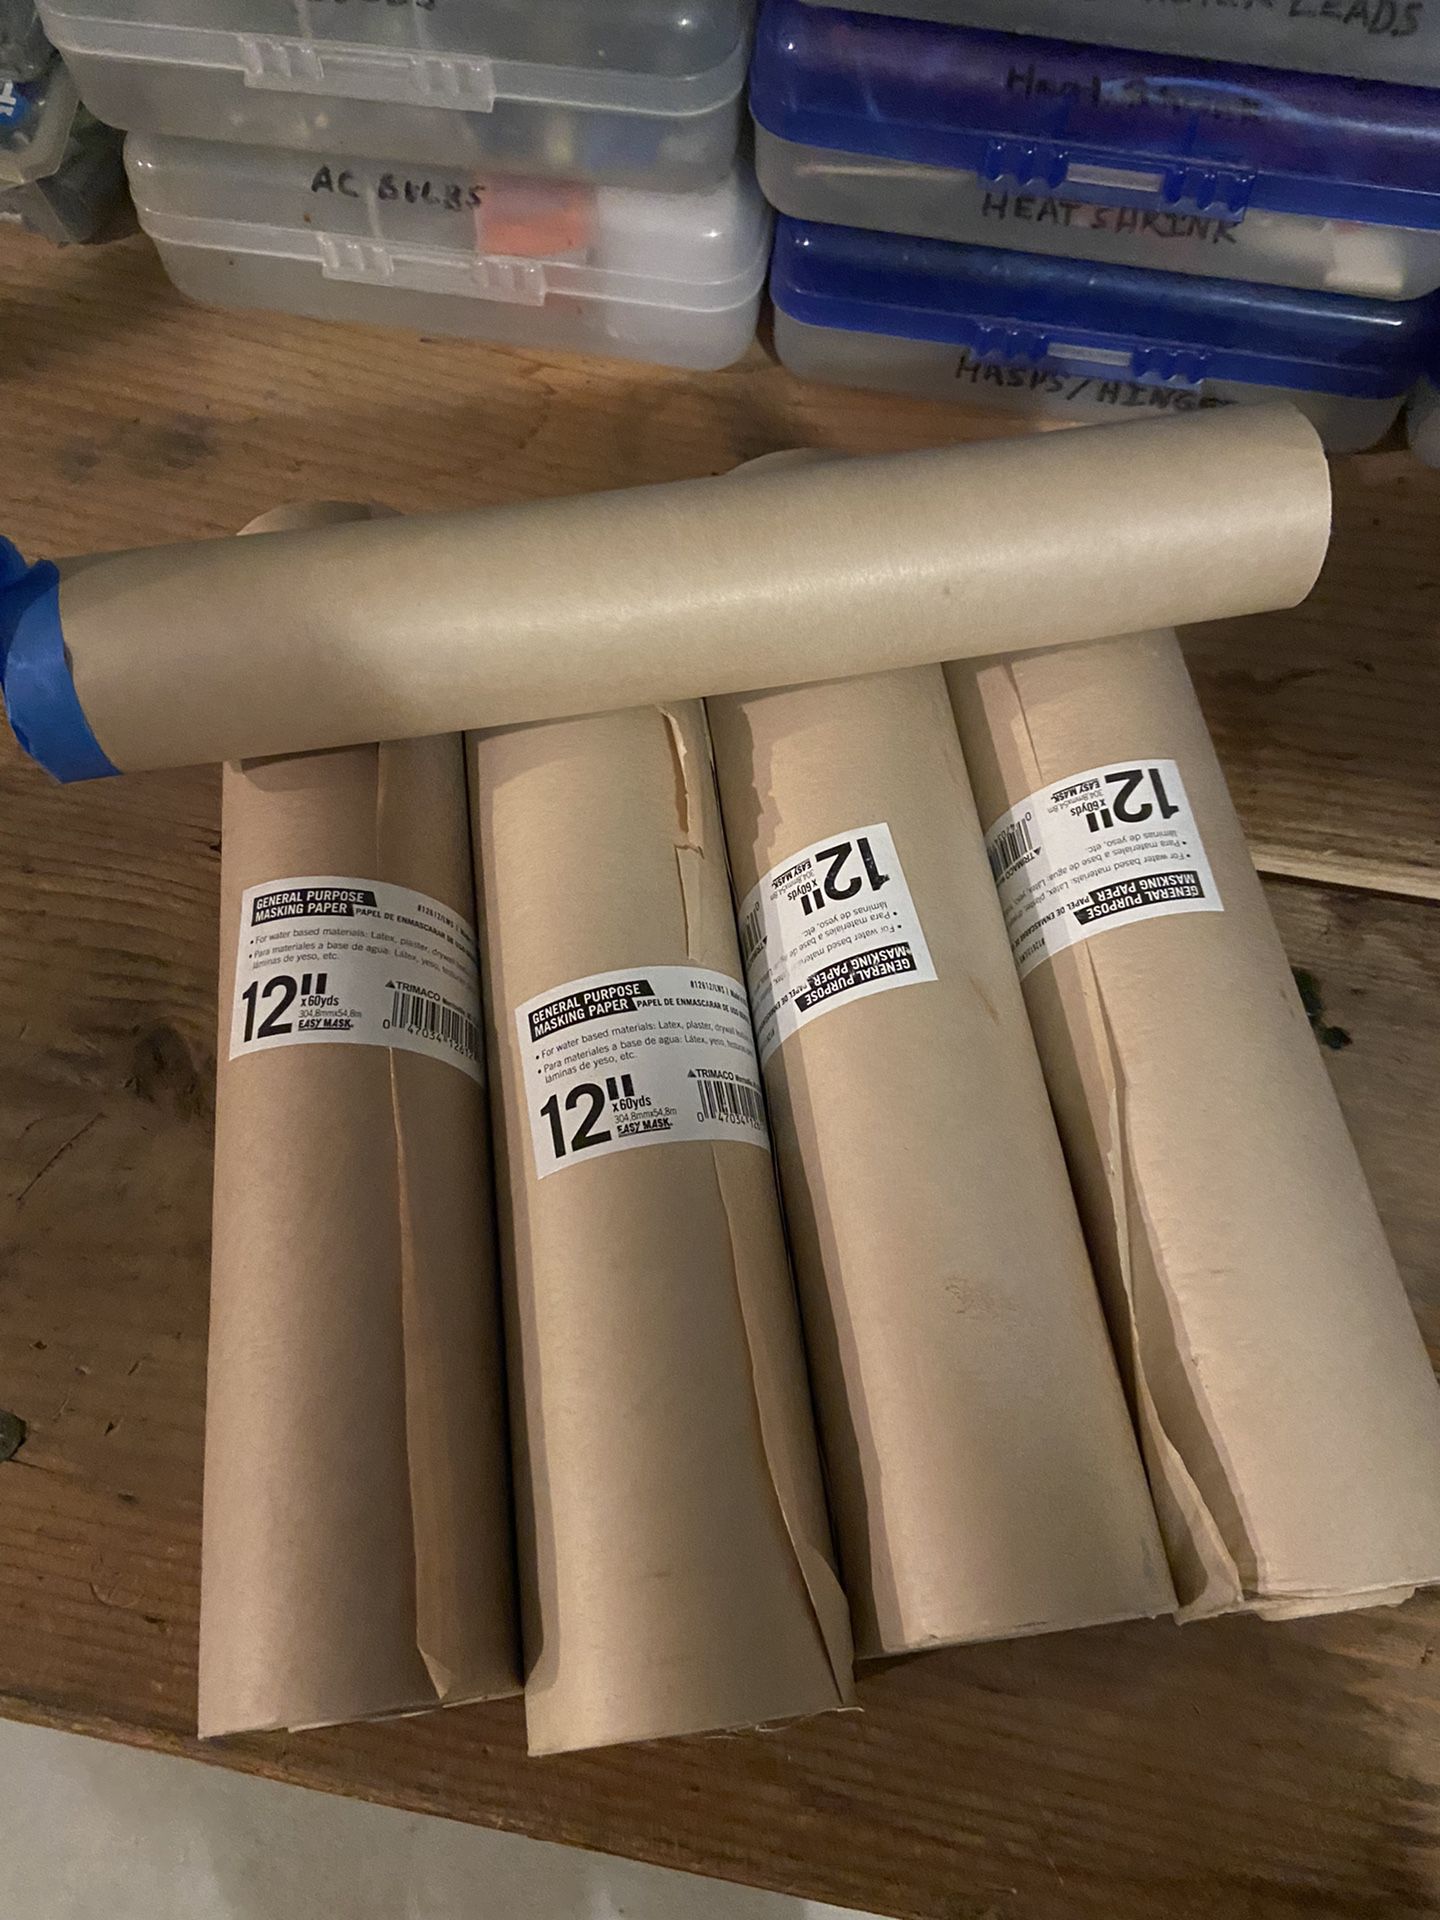 12” Masking Paper, 4 New, Unopened Rolls And 1 Partial Roll.